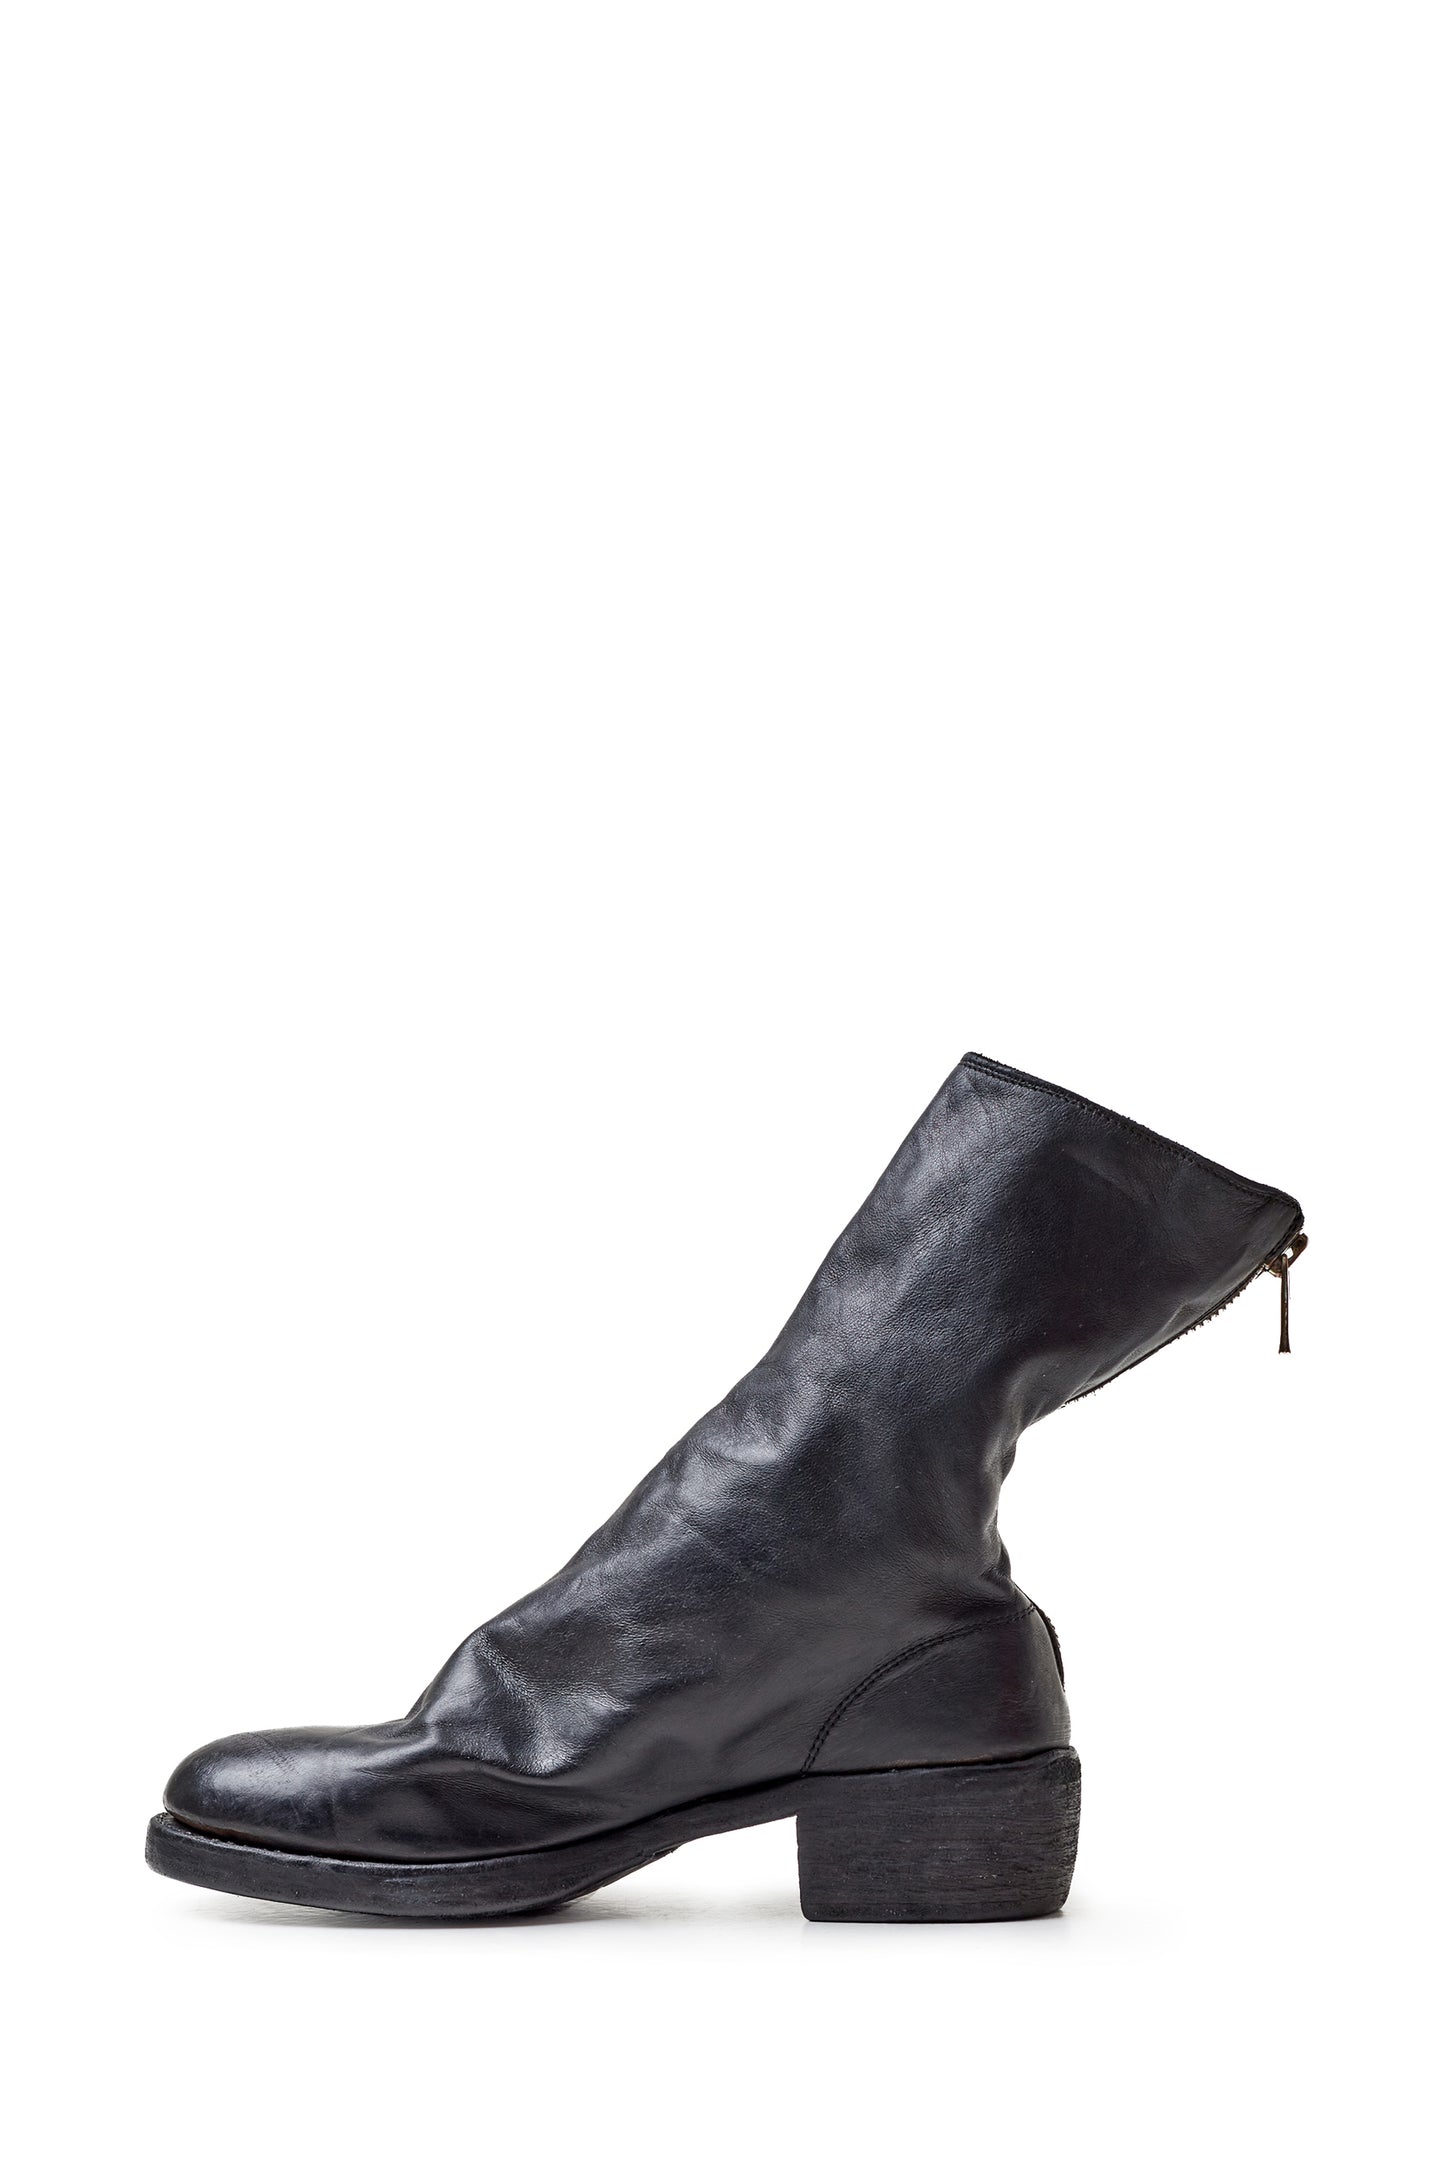 Guidi Back Zip 788z Boots